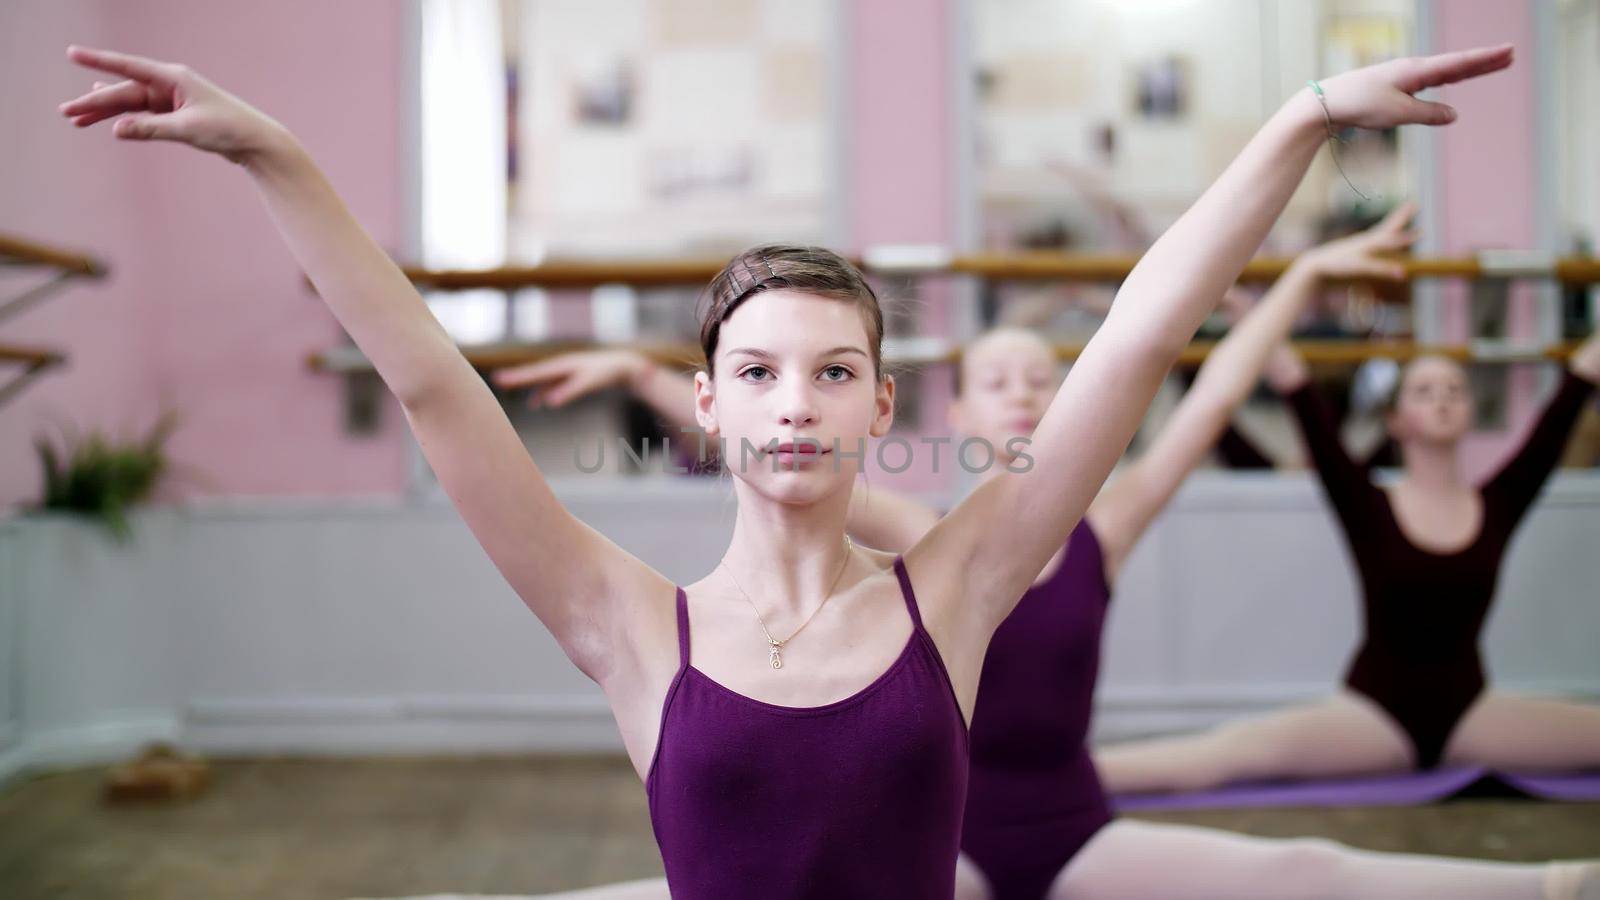 in dancing hall, Young ballerina in purple leotards performs part de bras In 3 position with forward tilt, girl is sitting on twine, moving hands elegantly , close-up. High quality photo